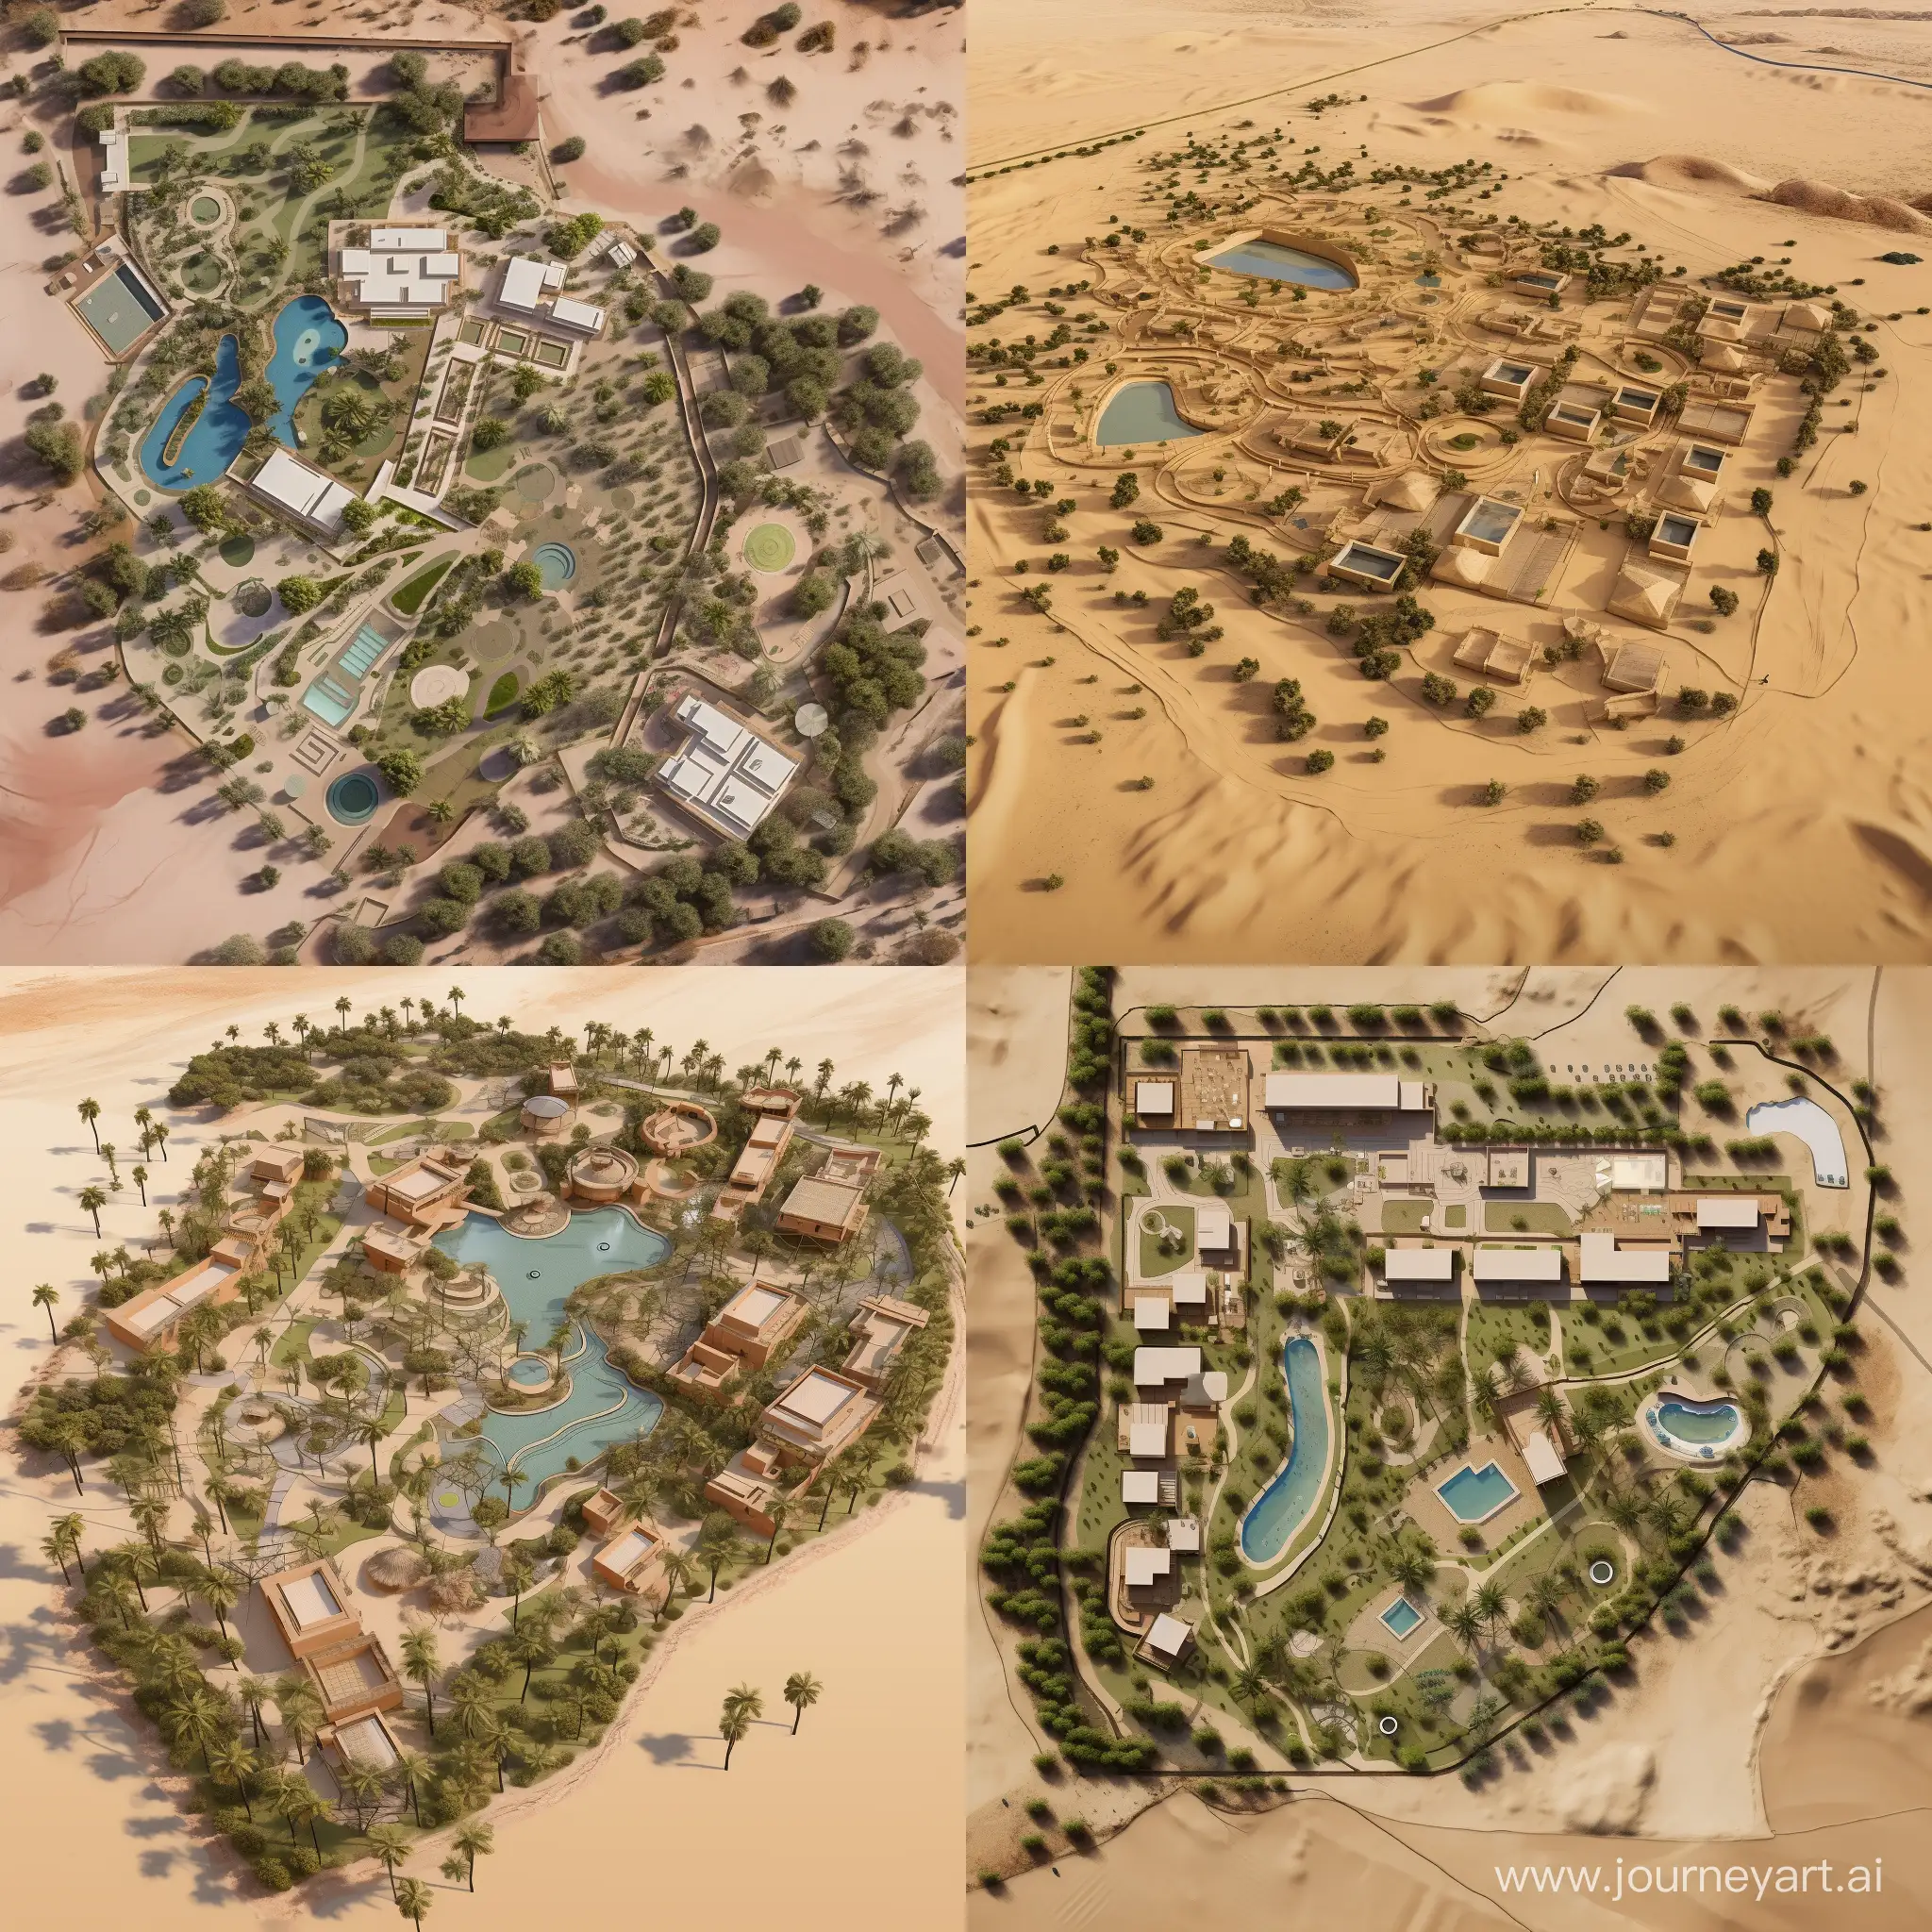 Ecotourism-Complex-with-Desert-Oasis-Aerial-View-of-2-Hectares